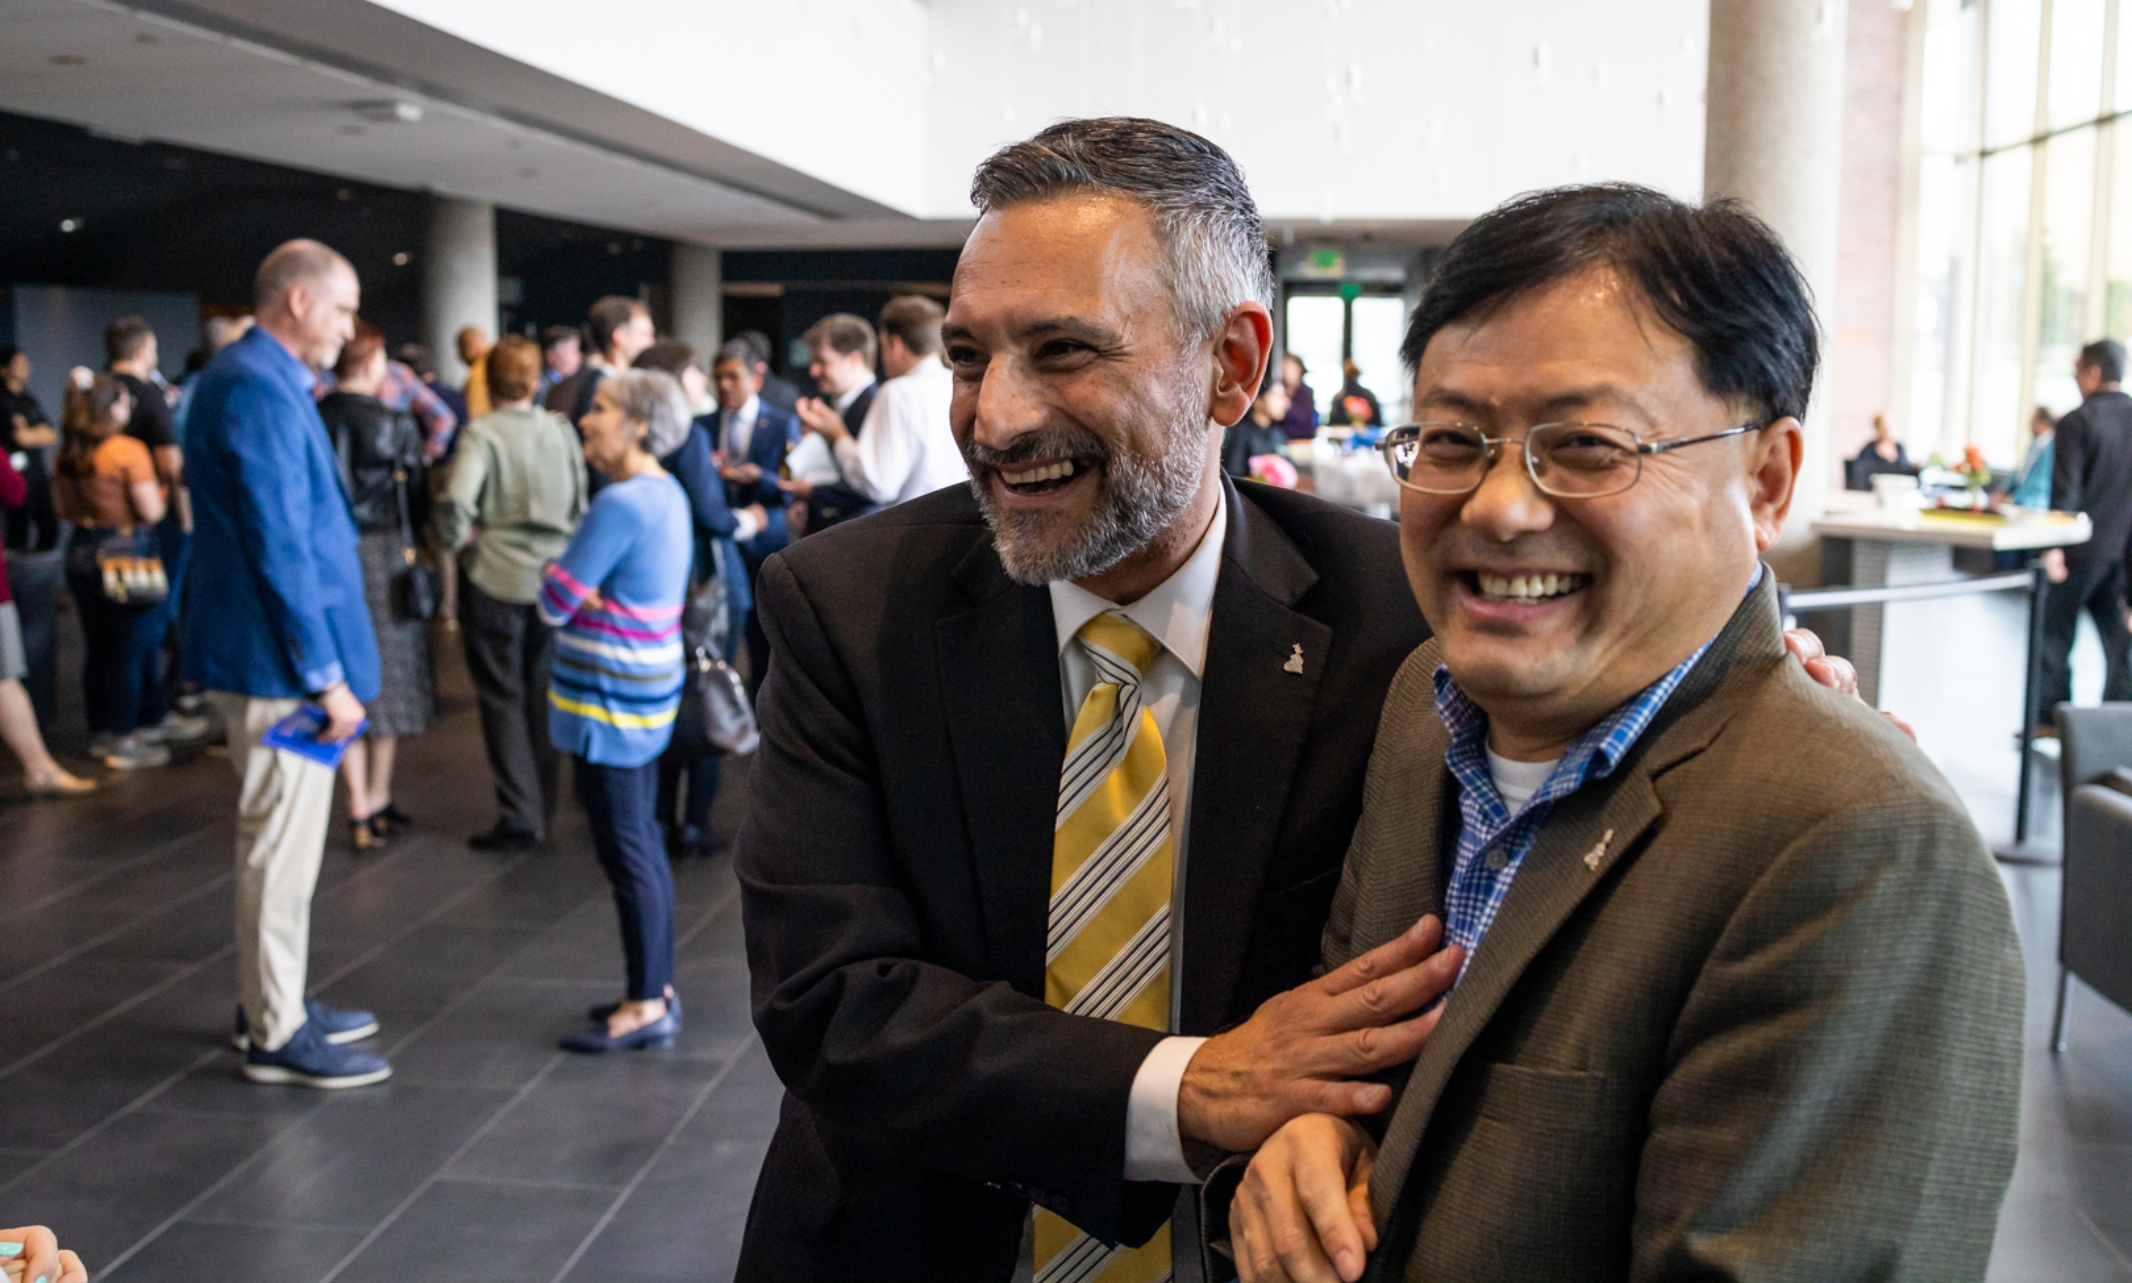 Conservatory Prof. Joseph Parisi and Vice Chancellor for Research and Economic Development Chris Liu share a laugh at post-ceremony reception